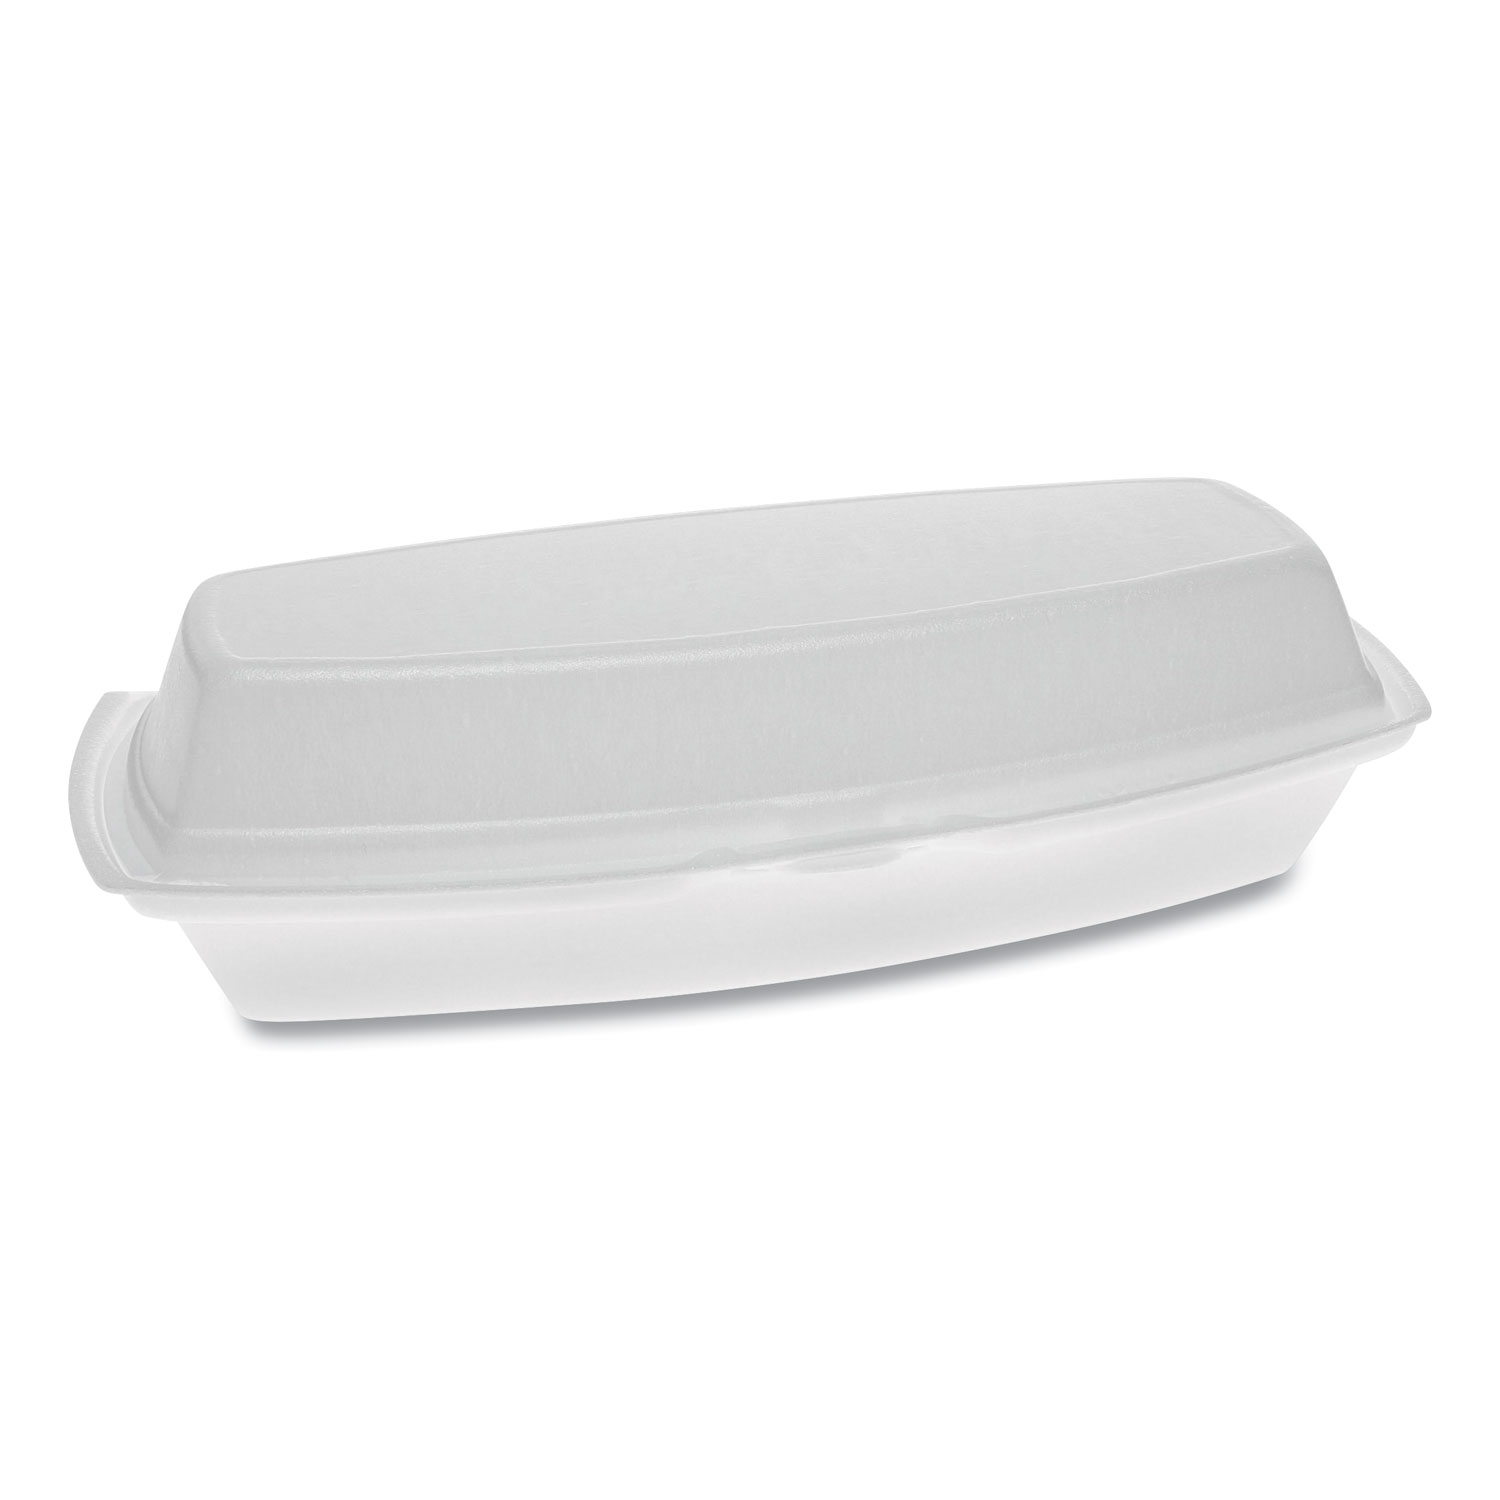  Pactiv YTH100980000 Foam Hinged Lid Containers, Single Tab Lock Hot Dog, 7.25 x 3 x 2, 1-Compartment, White, 504/Carton (PCTYTH100980000) 